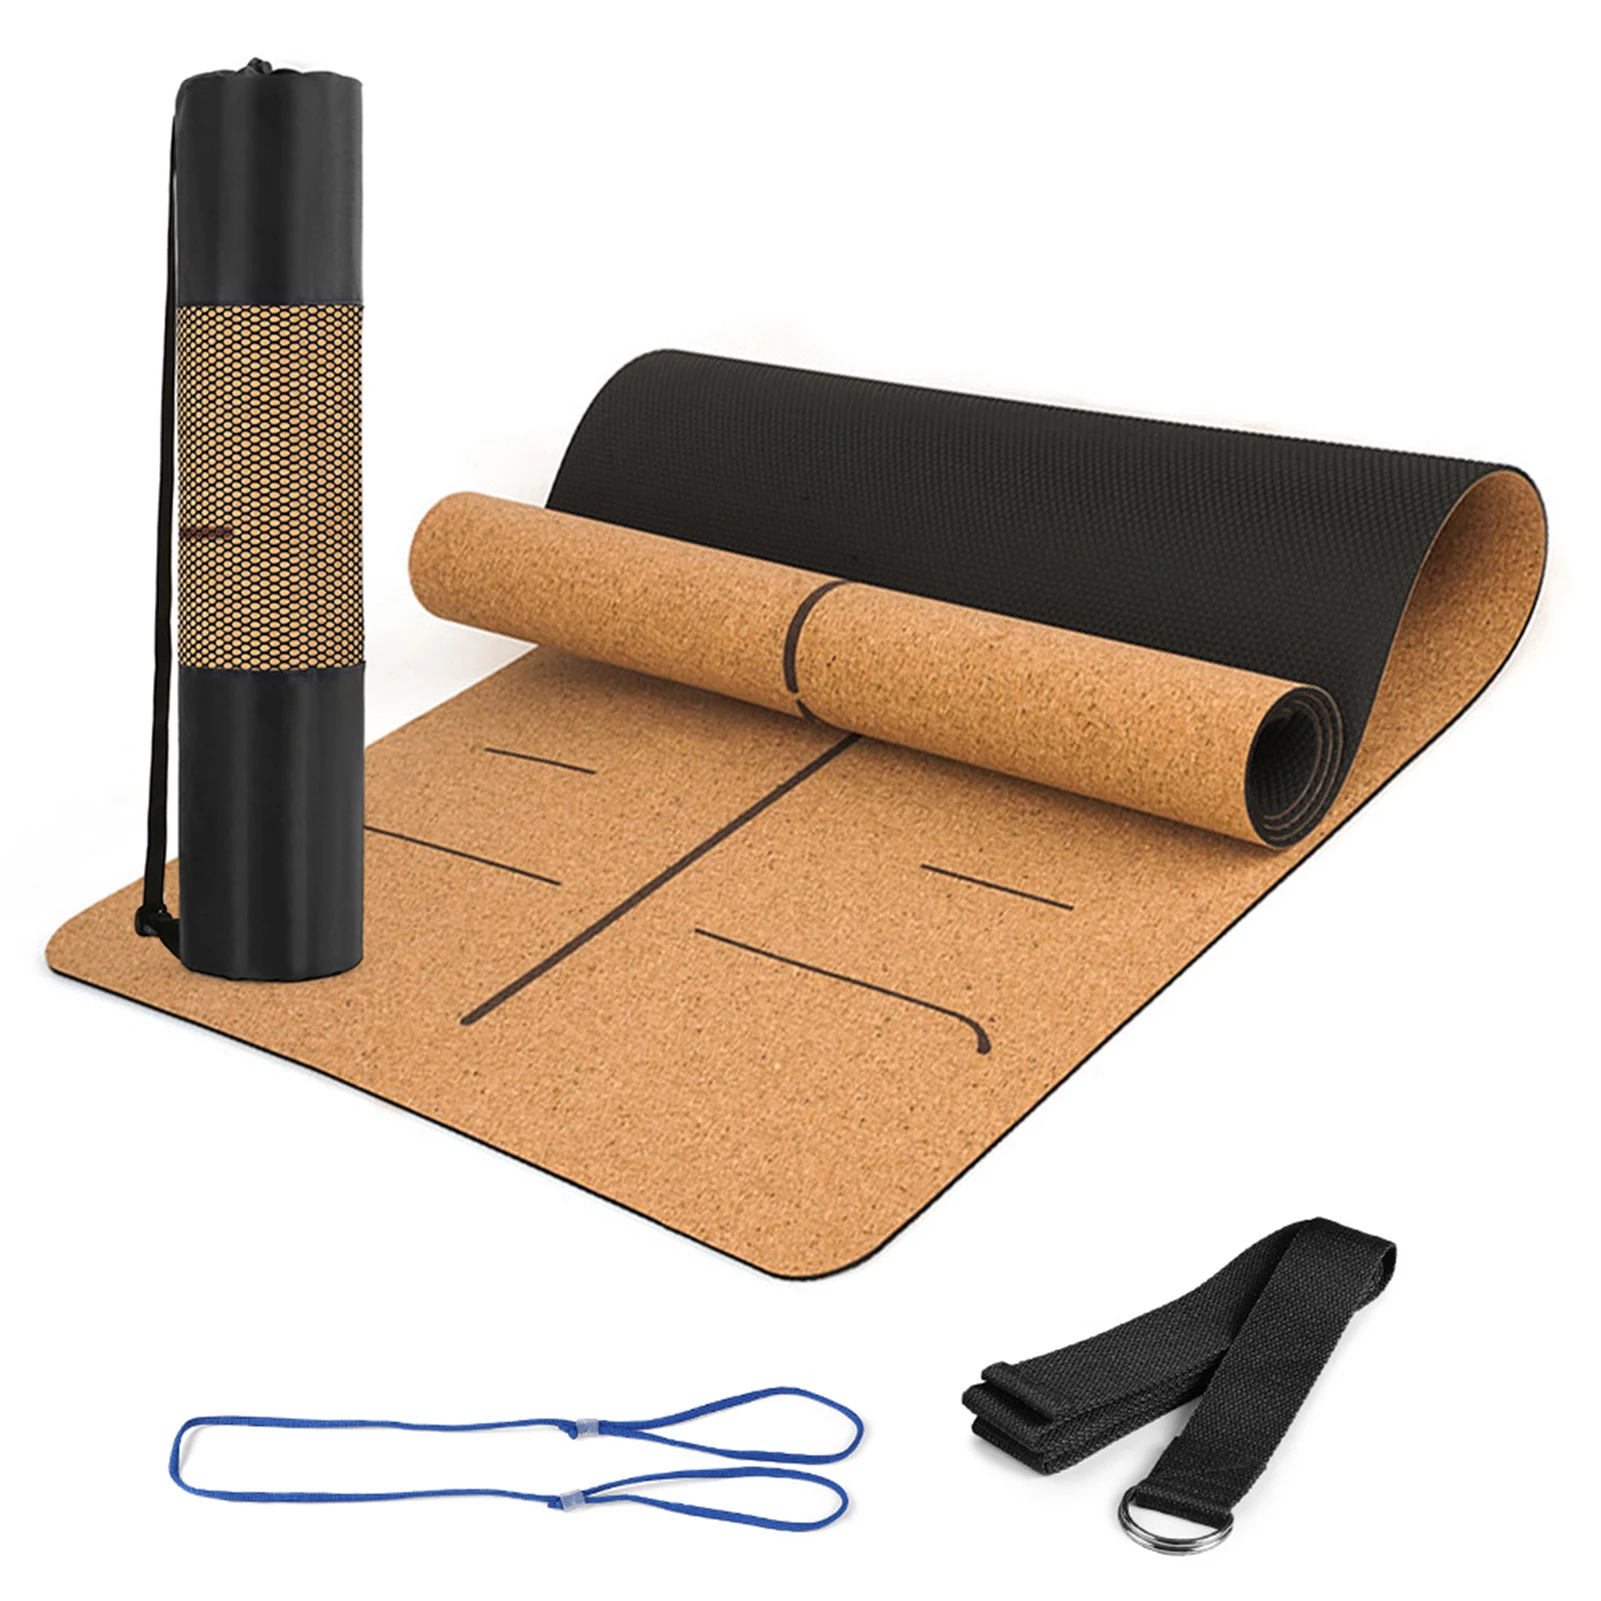 

New 5mm Thickened Non-slip 183cmX68cm Yoga Mat TPE Fitness Gym Mats Sports Cushion Gymnastic Pilates Pads With Yoga Bag & Strap